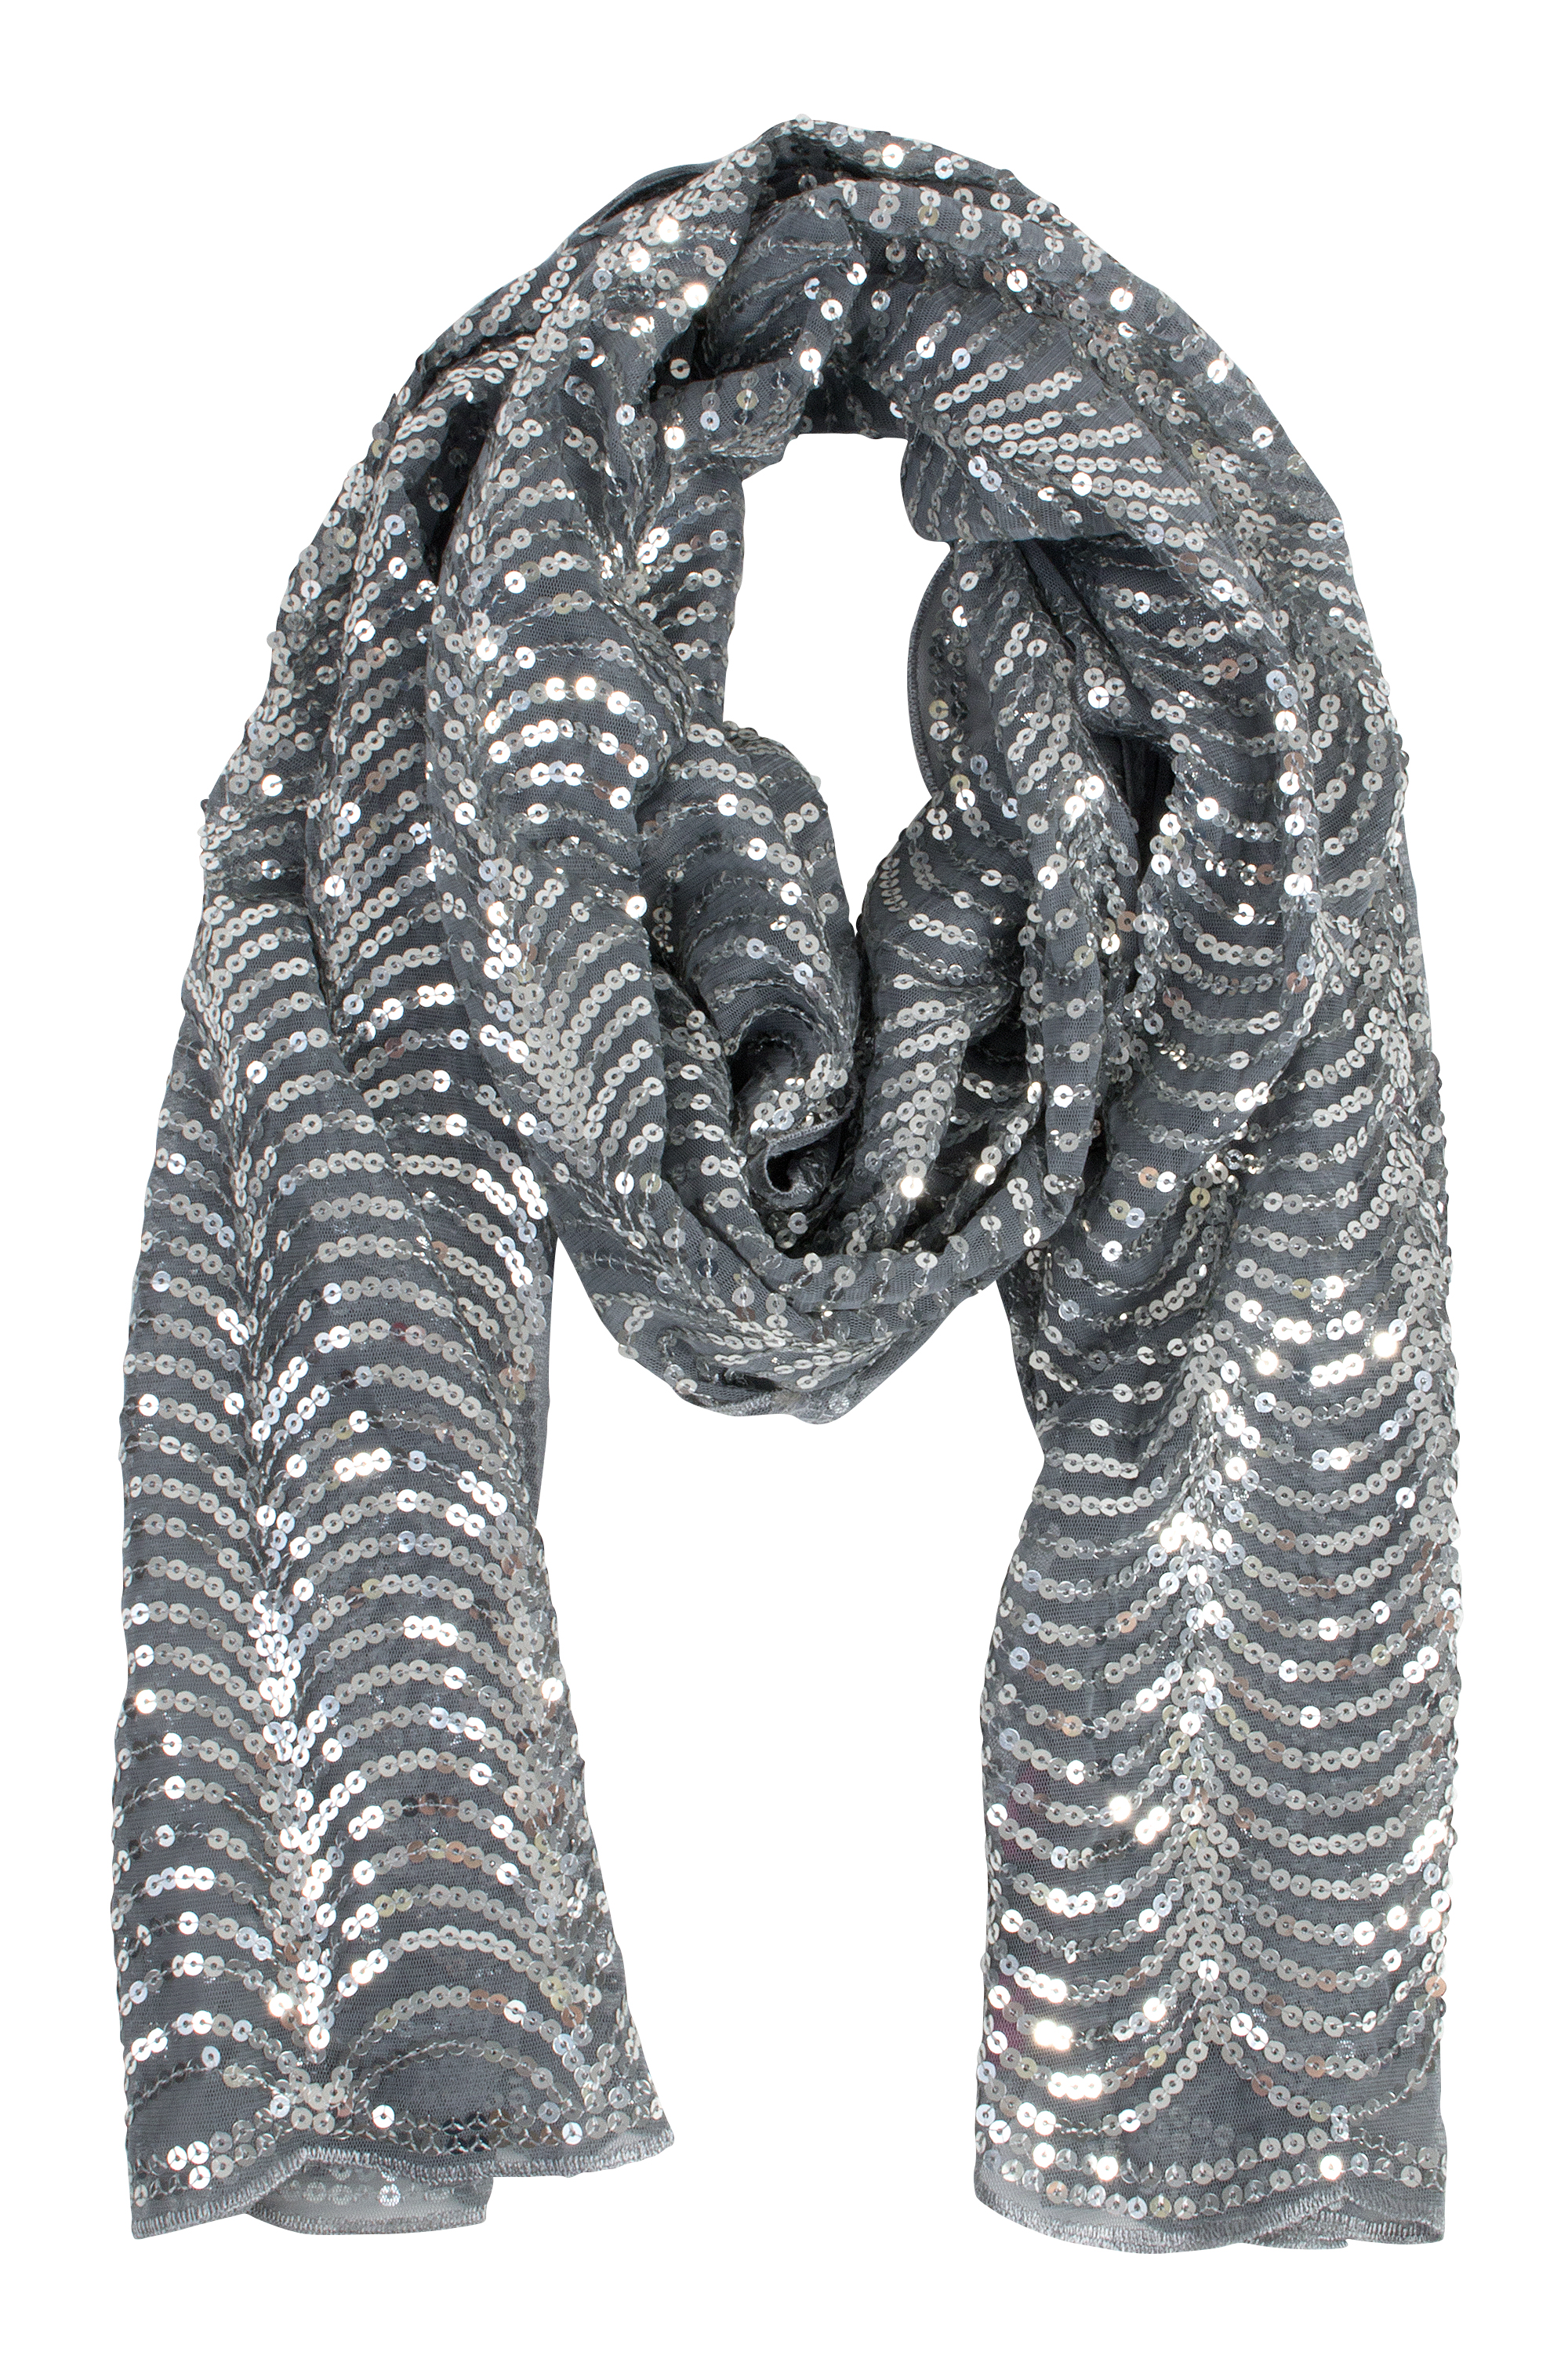 Betsey Johnson ”Grey Story Scarf,” $34 at Belk of Mount Pleasant